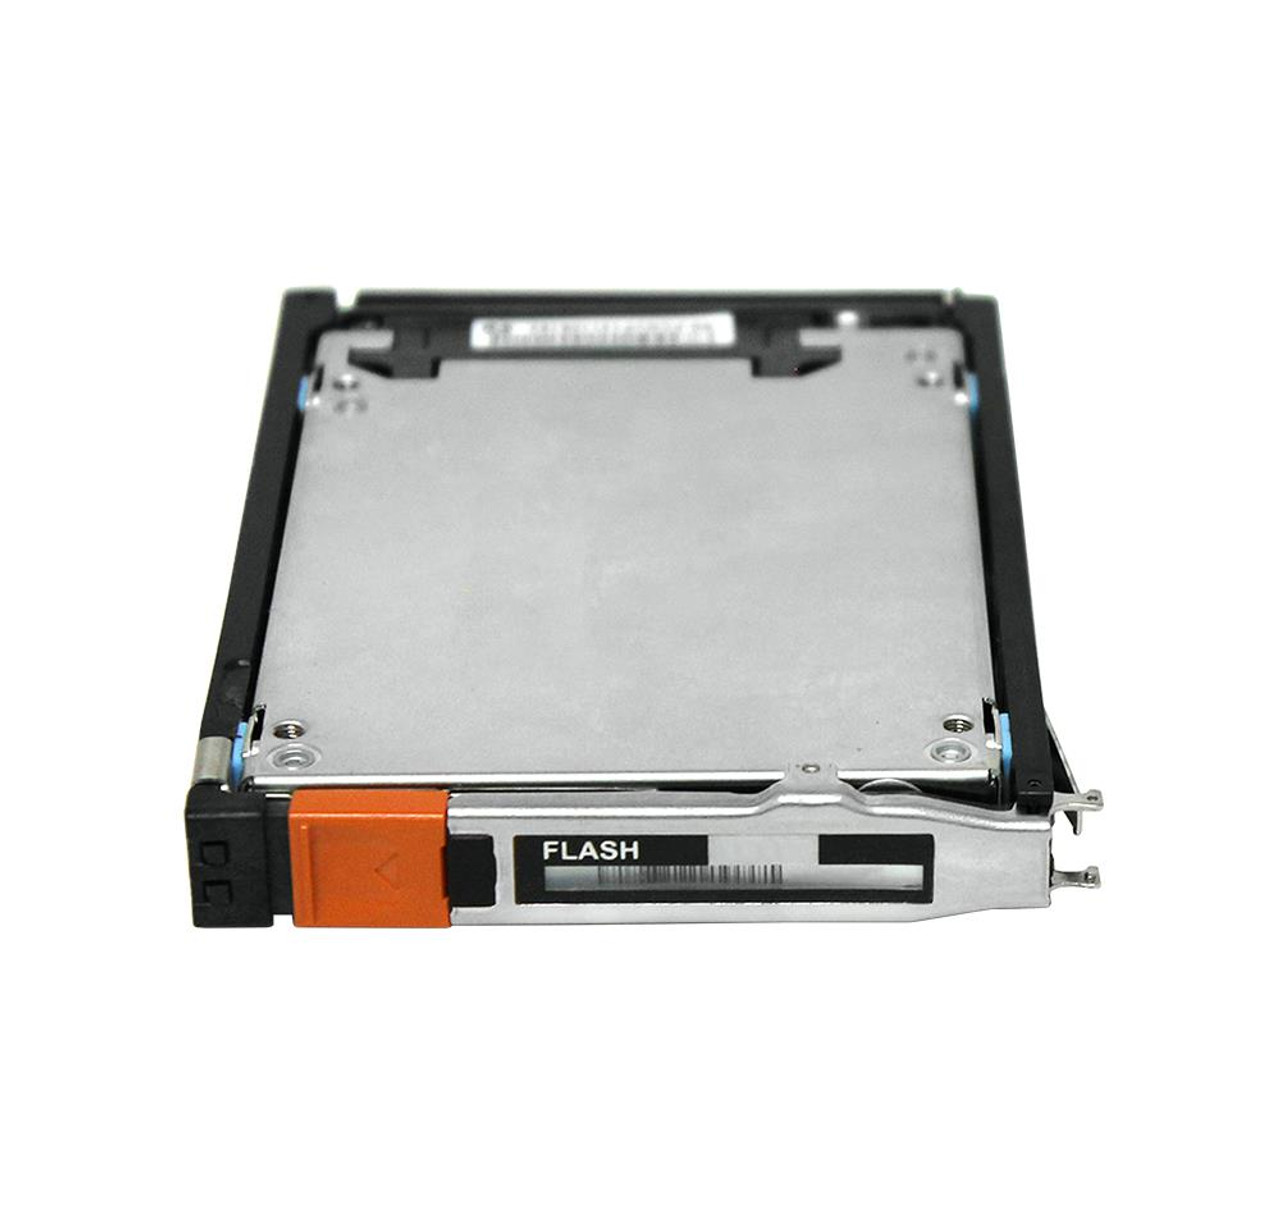 005050531 EMC 100GB SAS 6Gbps 2.5-inch Internal Solid State Drive (SSD) for VNX Series Storage Systems